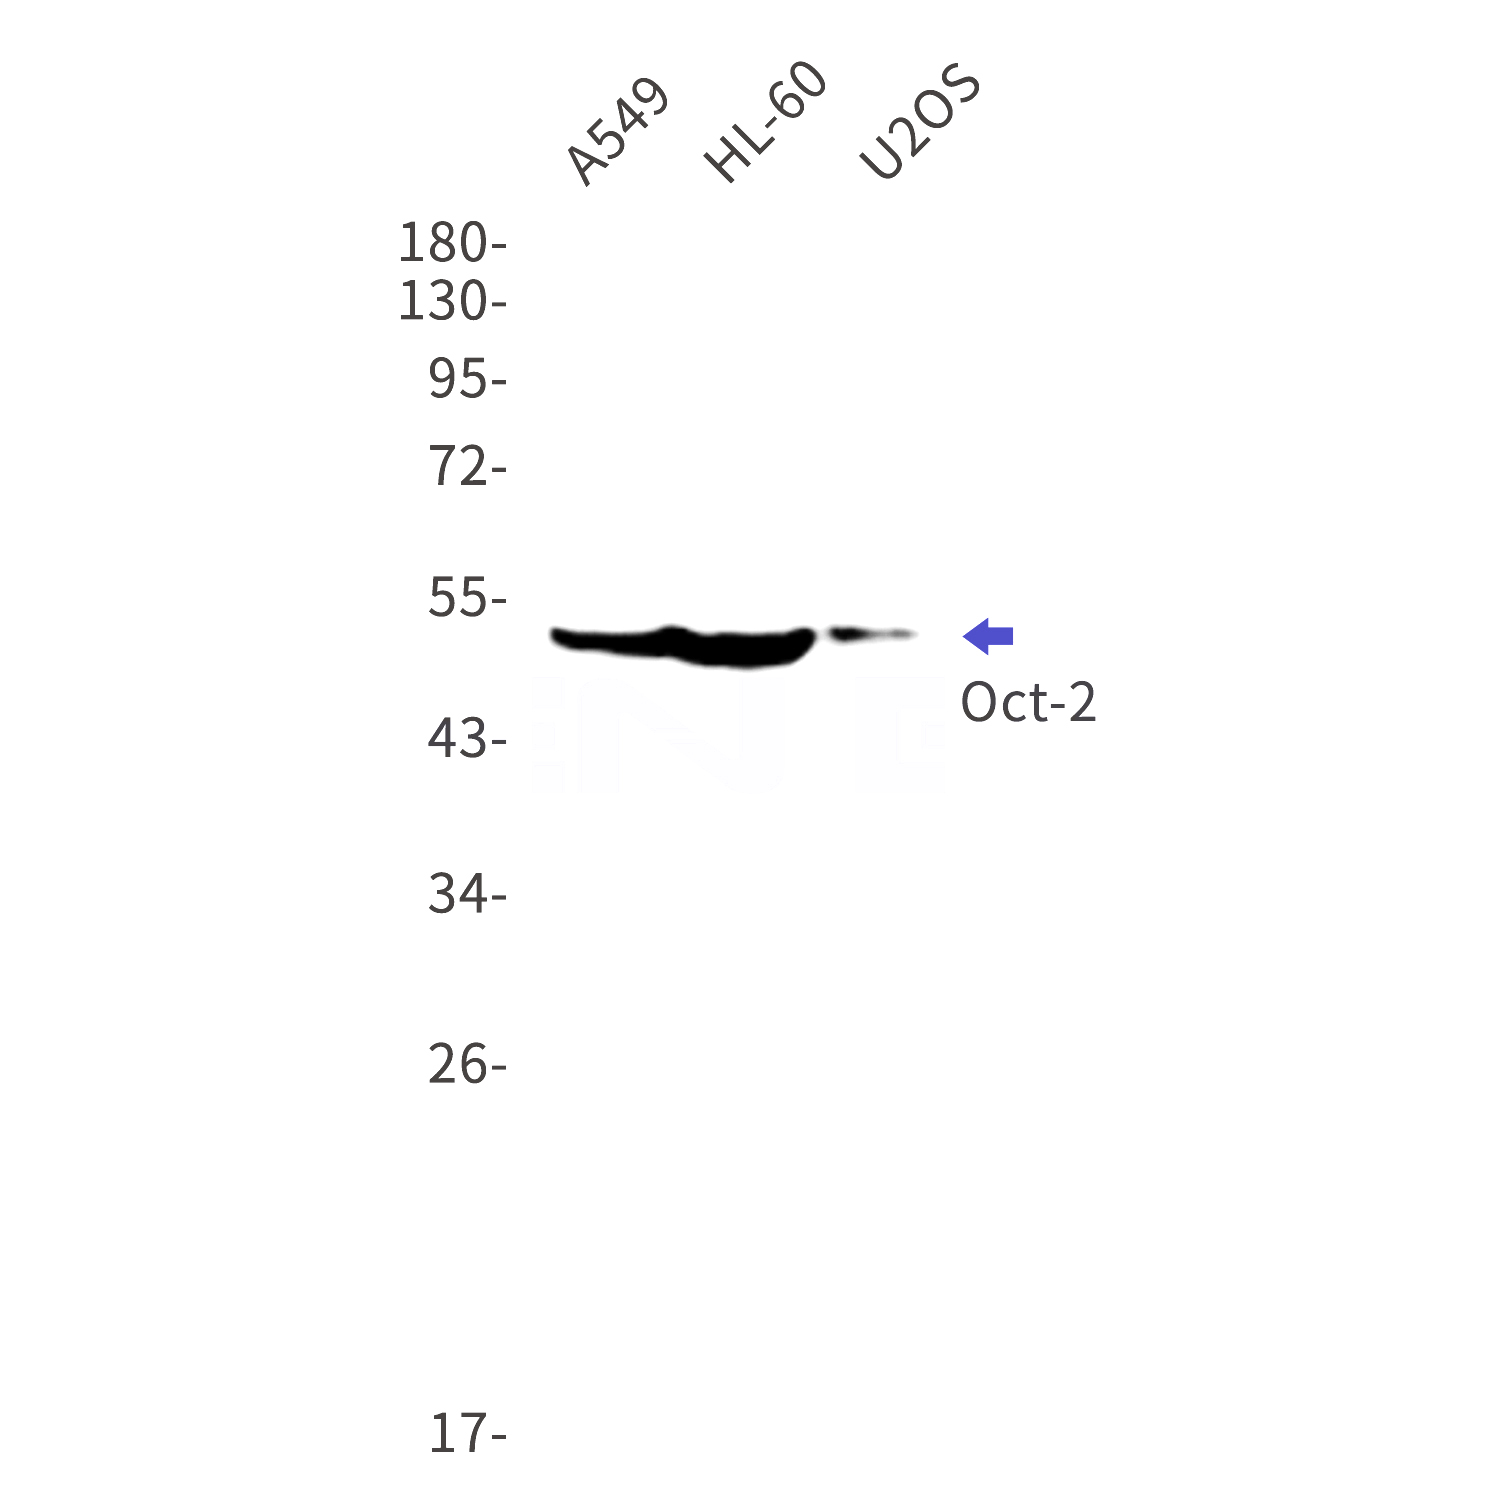 Western blot detection of Oct-2 in A549,HL-60,U2OS cell lysates using Oct-2 Rabbit mAb(1:1000 diluted).Predicted band size:51kDa.Observed band size:51kDa.